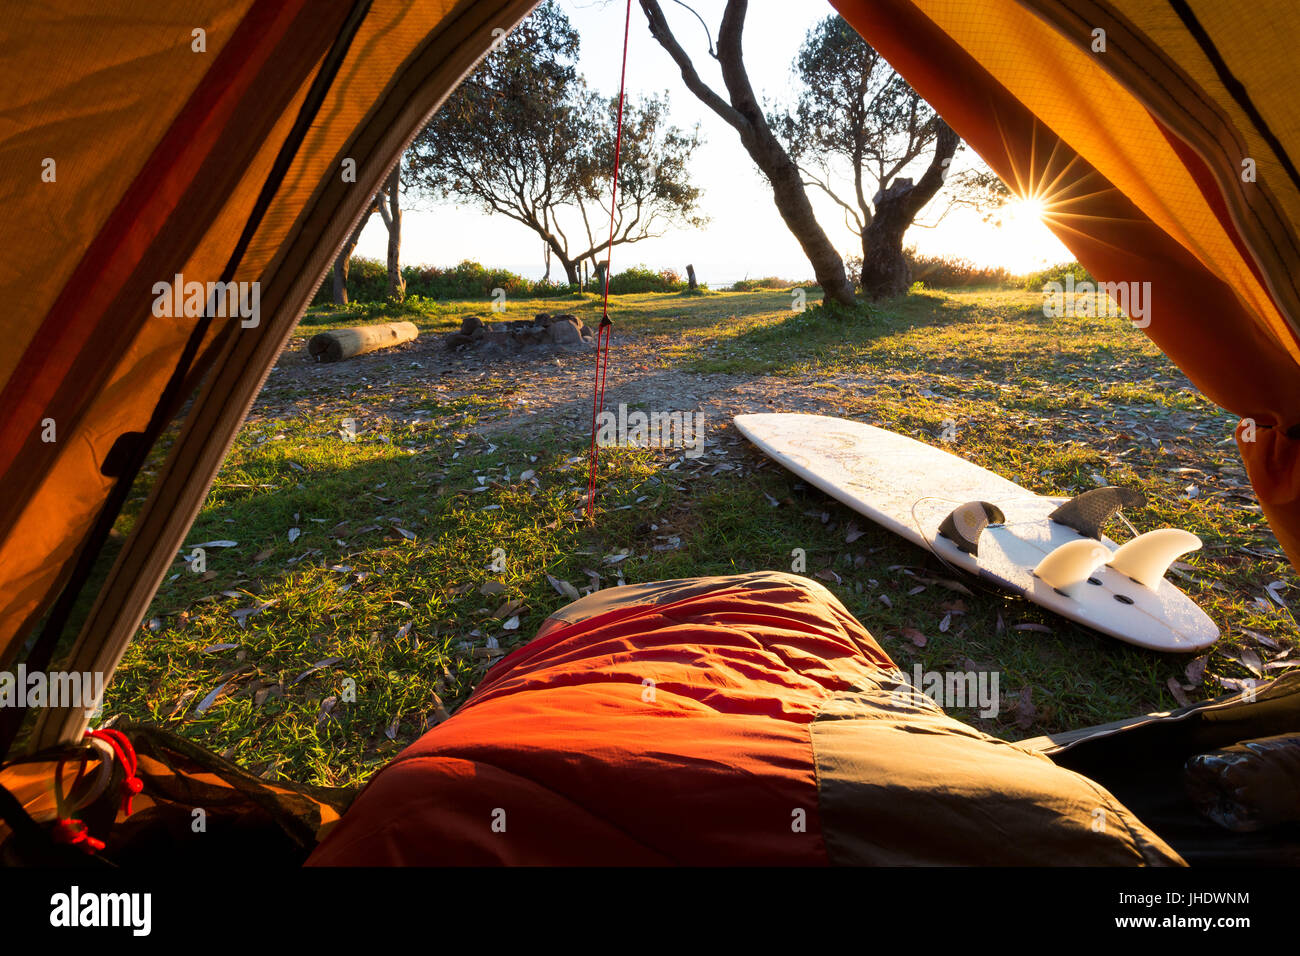 A person in a sleeping bag with a beautiful point of view from a tent as morning light illuminates the campground and surrounds. Stock Photo